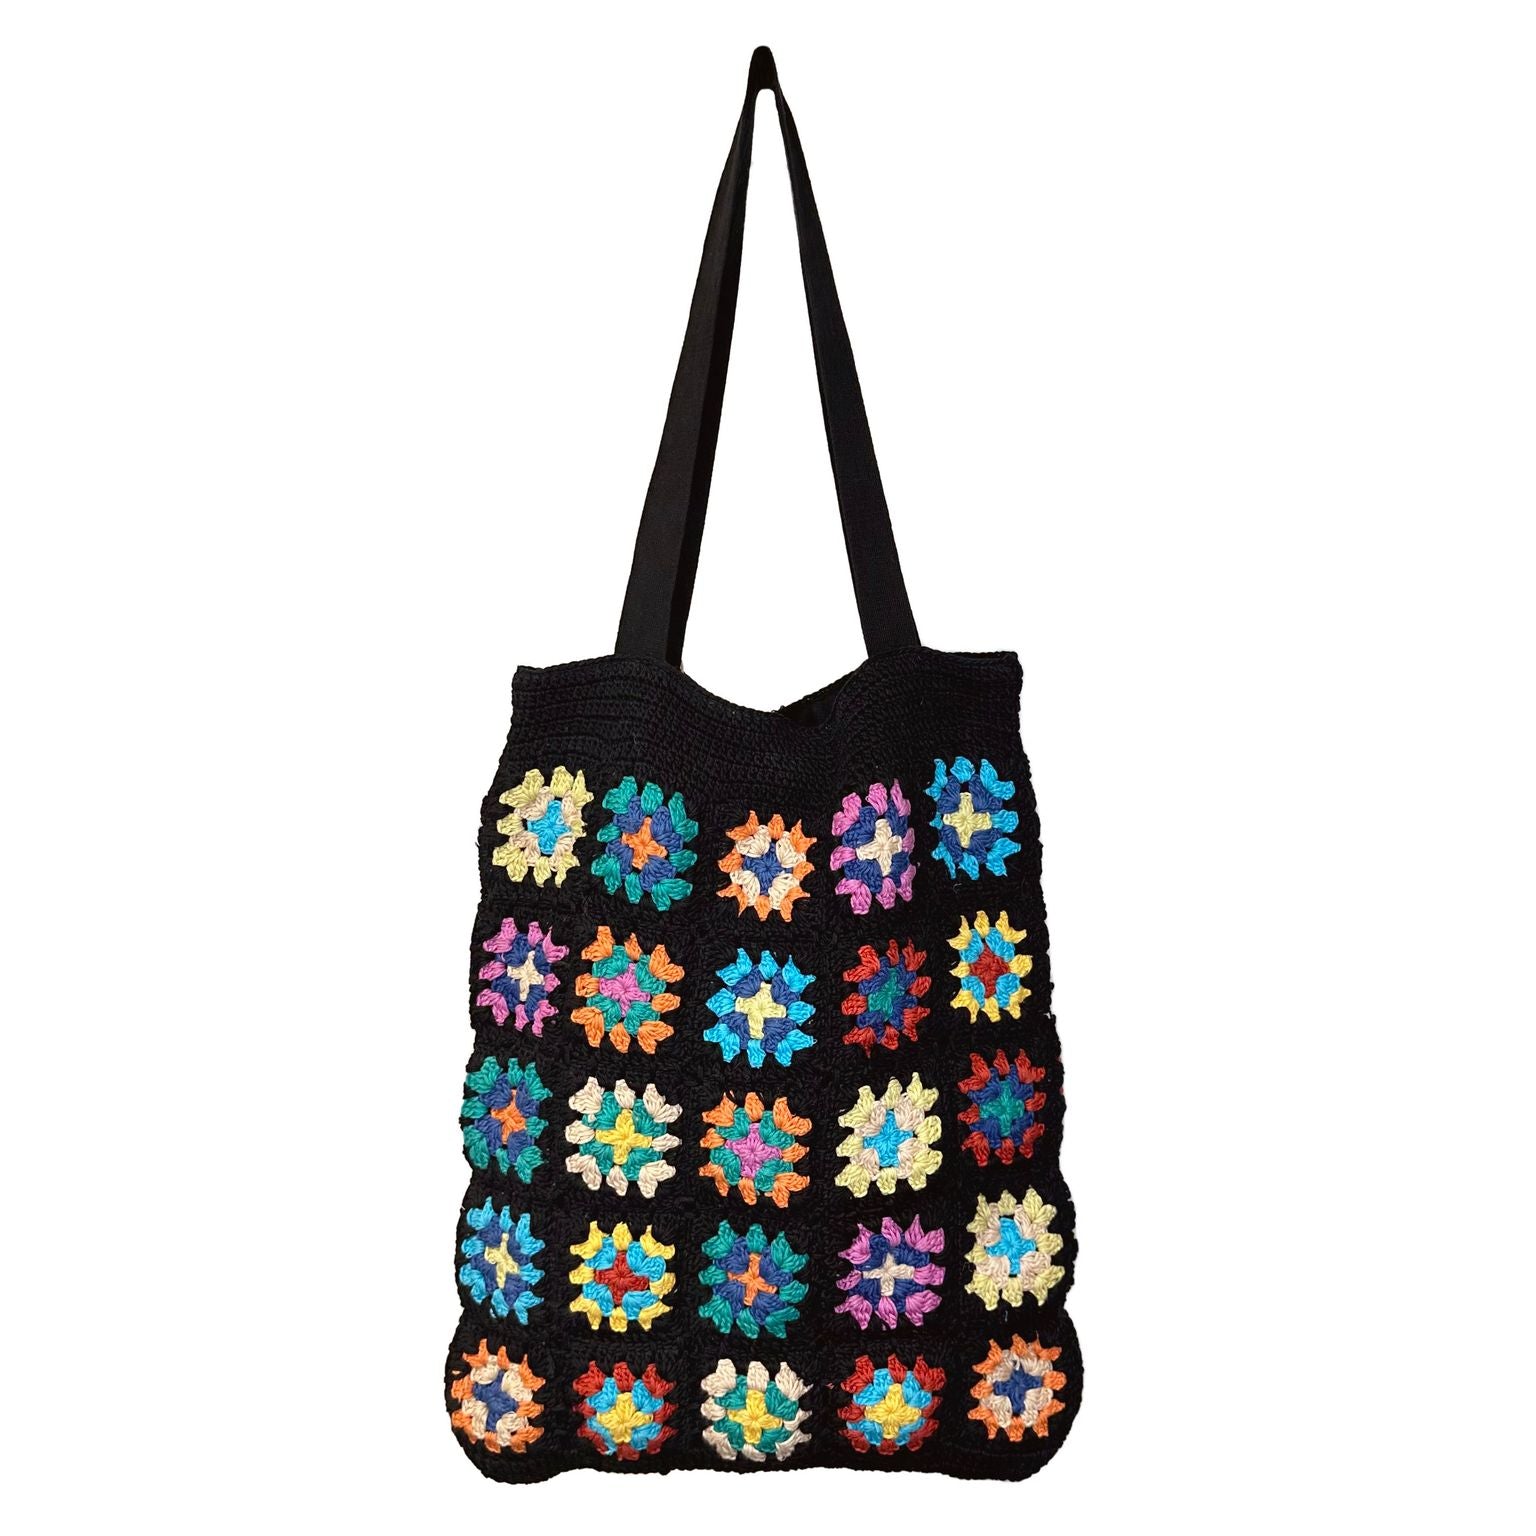 black crochet bag with colorful granny squares.